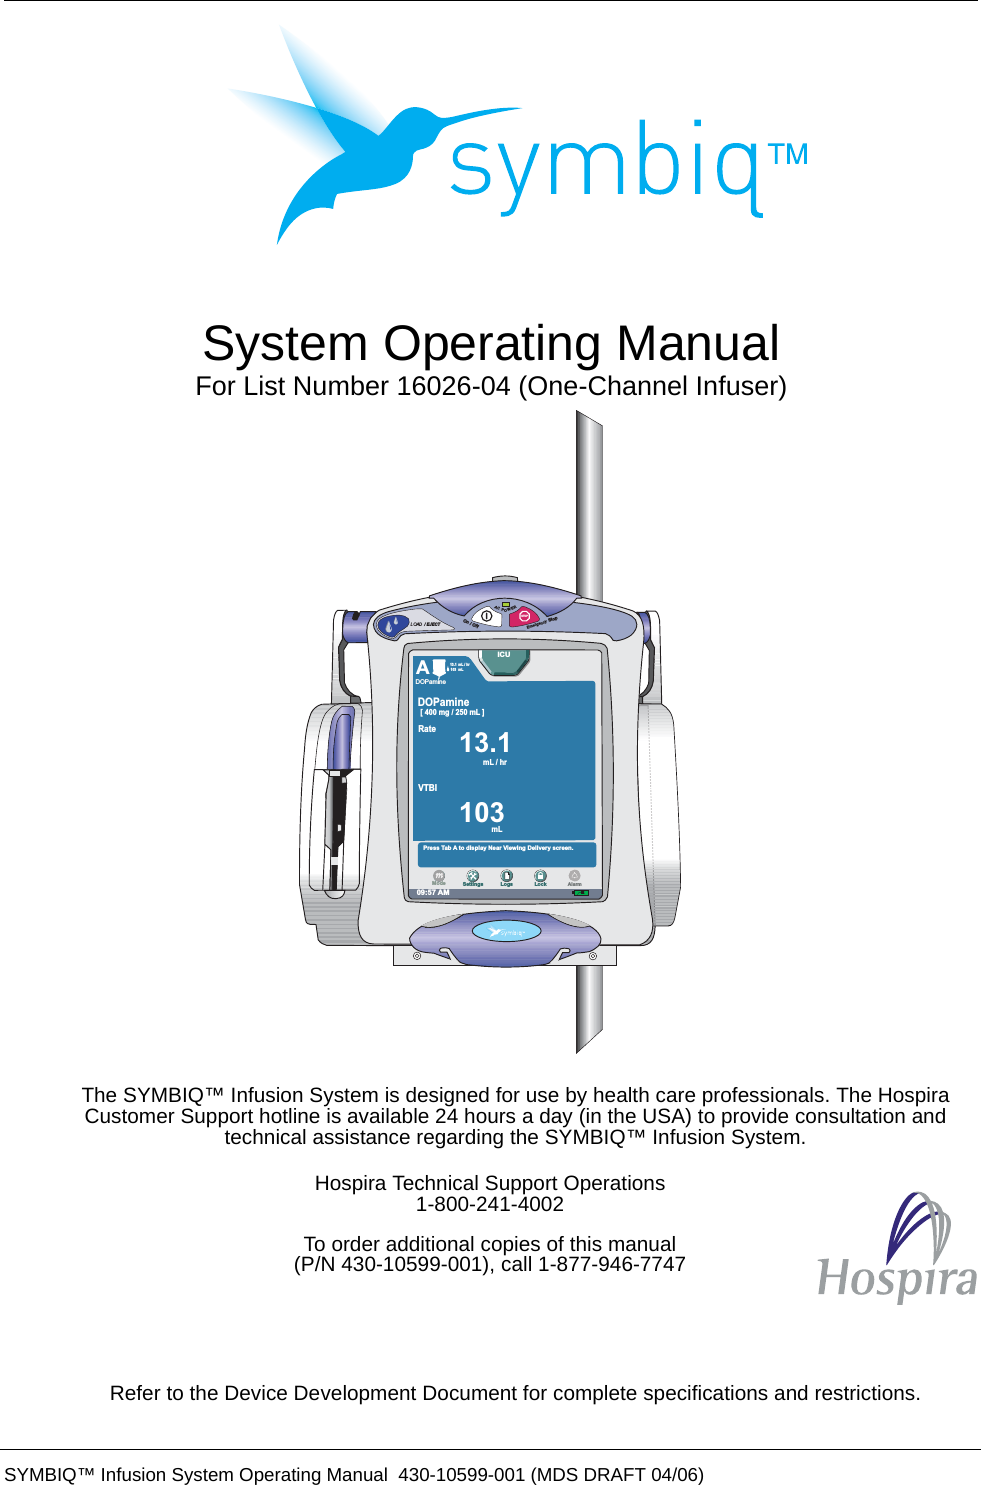  SYMBIQ™ Infusion System Operating Manual  430-10599-001 (MDS DRAFT 04/06) System Operating ManualFor List Number 16026-04 (One-Channel Infuser)The SYMBIQ™ Infusion System is designed for use by health care professionals. The Hospira Customer Support hotline is available 24 hours a day (in the USA) to provide consultation and technical assistance regarding the SYMBIQ™ Infusion System.FRefer to the Device Development Document for complete specifications and restrictions.Hospira Technical Support Operations1-800-241-4002To order additional copies of this manual(P/N 430-10599-001), call 1-877-946-7747LOAD / EJECTSTOPACPOWEREmergencyStopOn/Off09:57 AMPress Tab A to display Near Viewing Delivery screen.A13.1 mL / hr13.1mL / hr103 mL103mLVTBI[ 400 mg / 250 mL ]DOPamineRateSettings Logs LockModeICUAlarmDOPamine